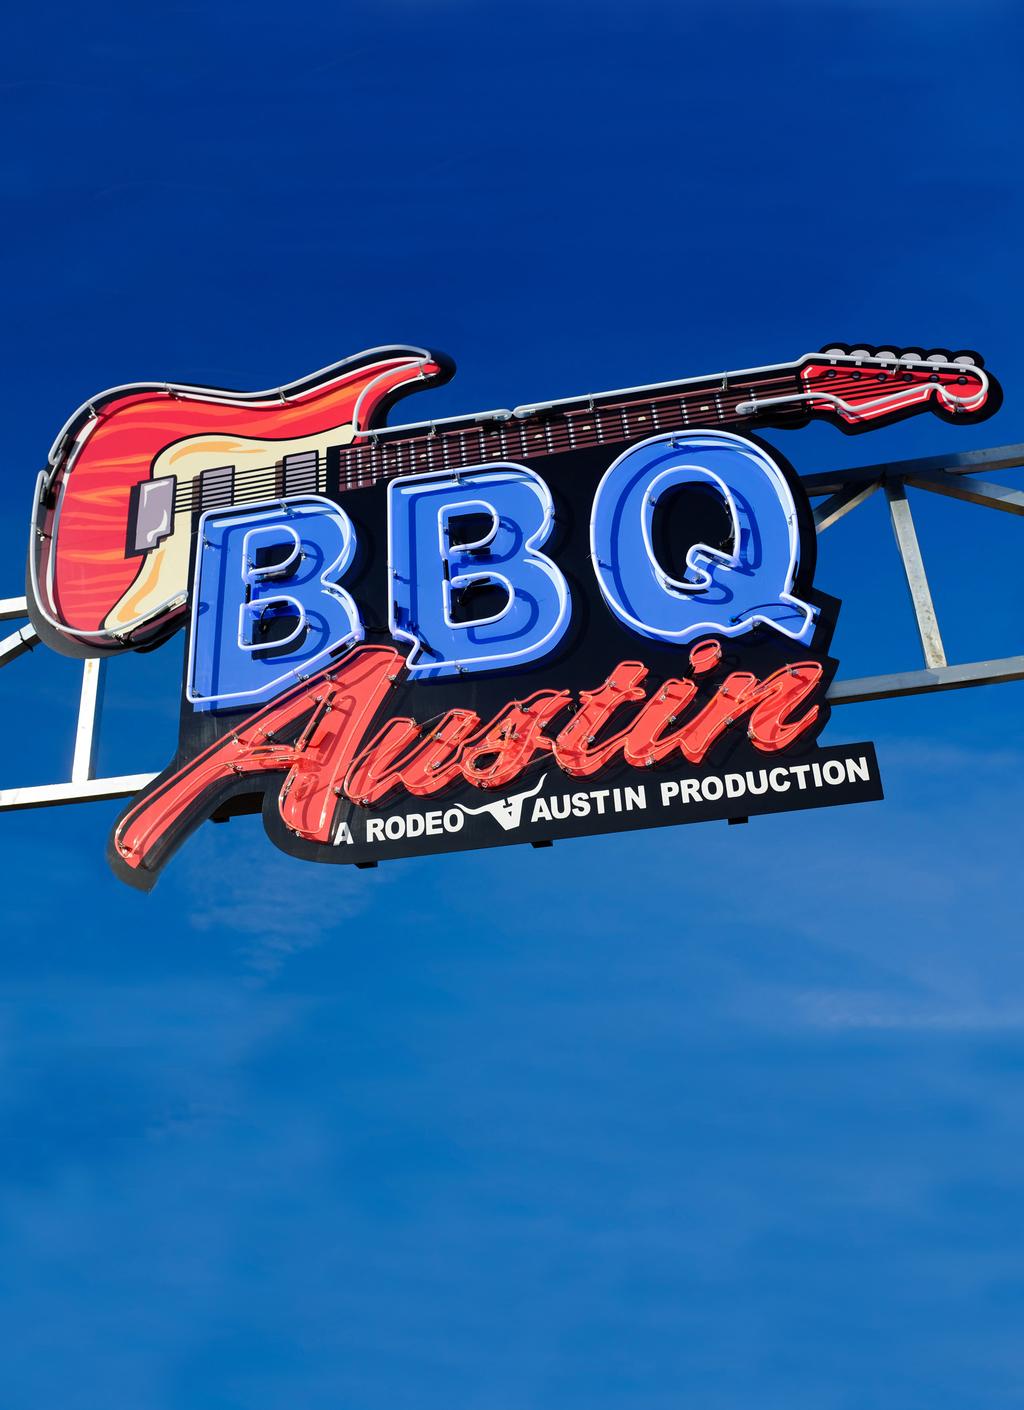 BBQ AUSTIN BBQ Austin features an action-packed BBQ competition with more